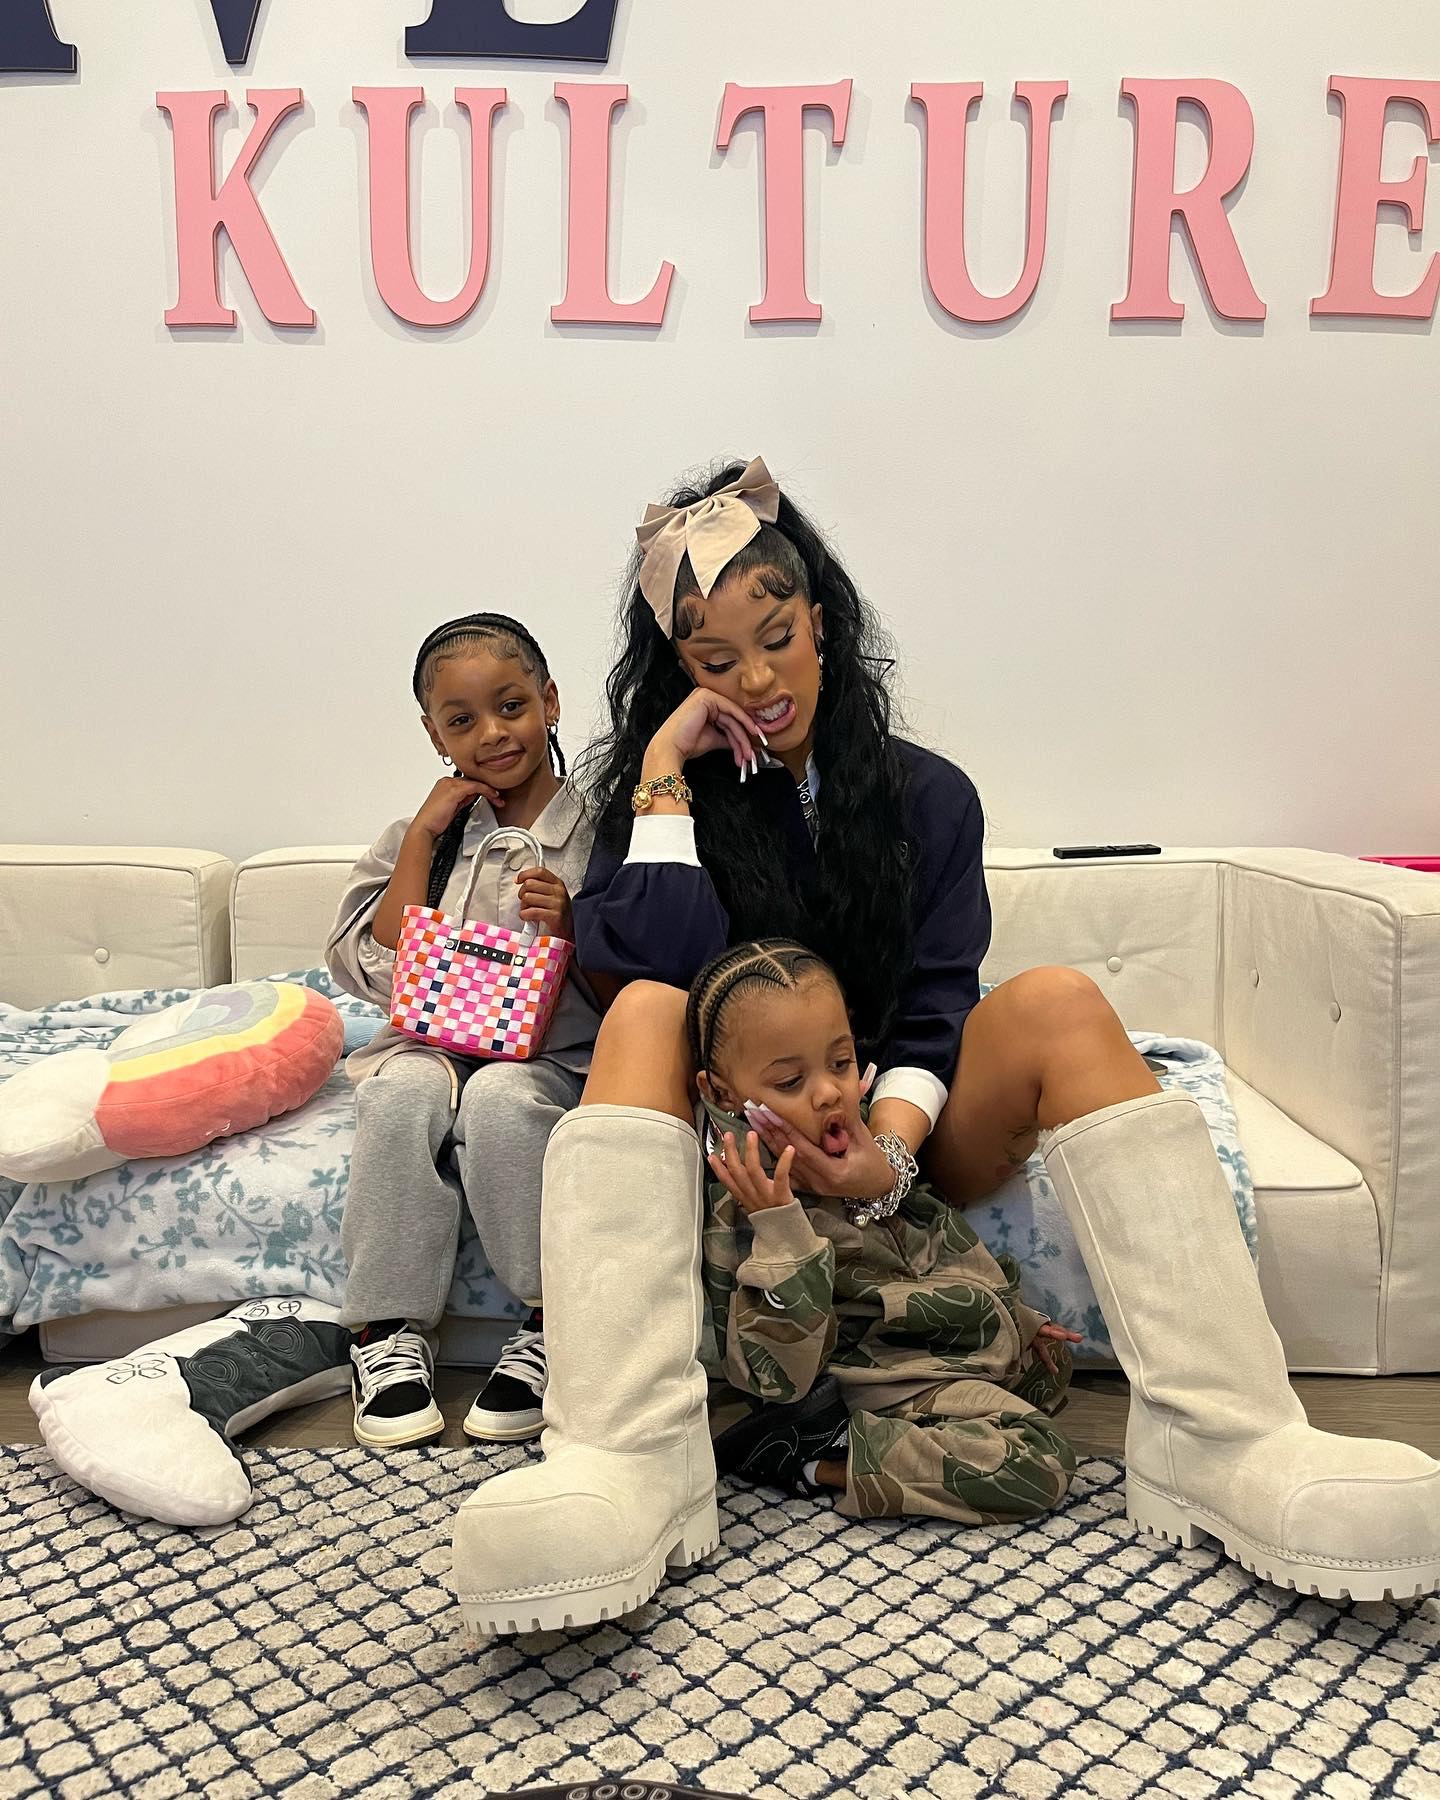 Cardi and Offset are already parents to their daughter, Kulture, and their son, Wave